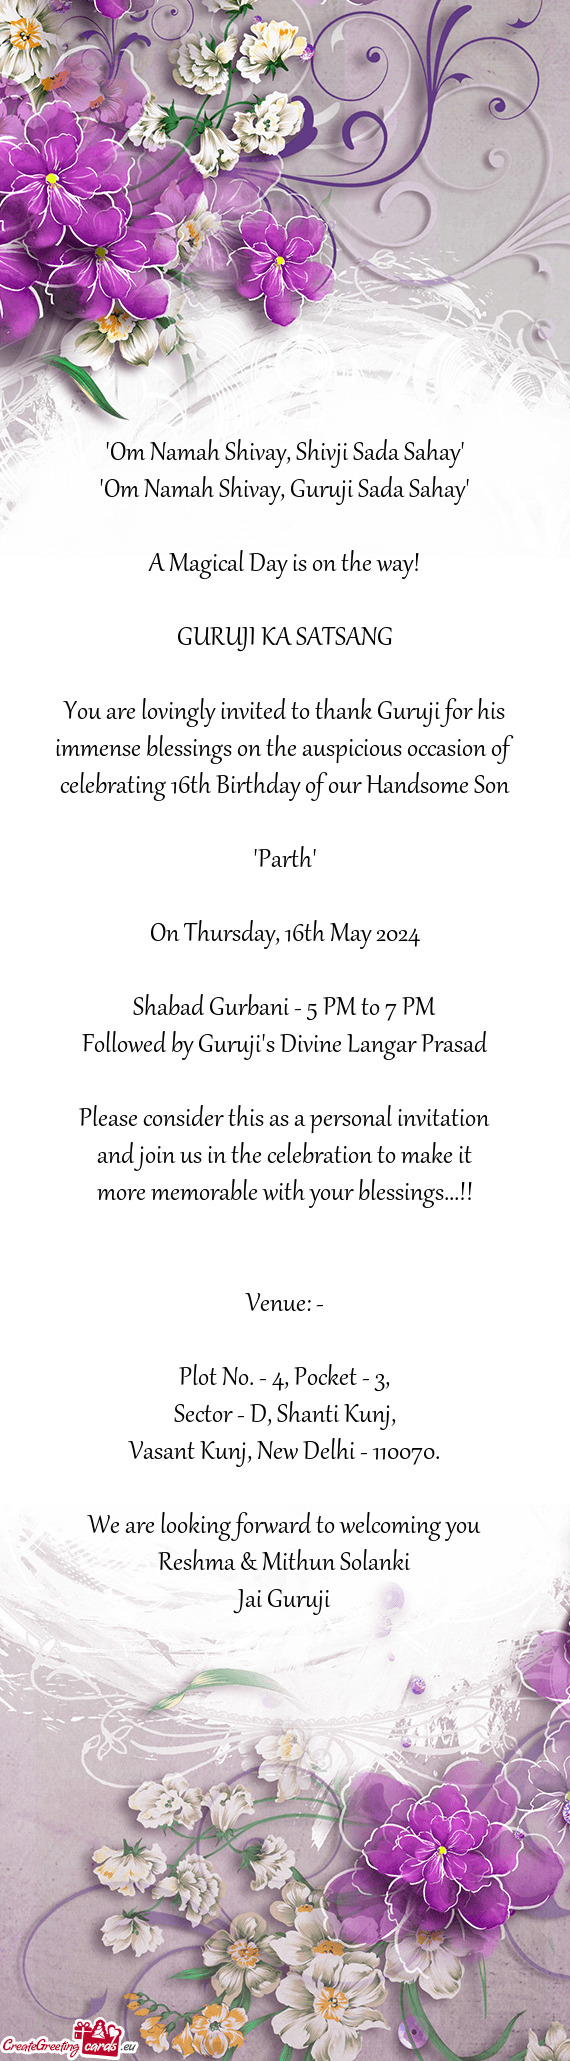 You are lovingly invited to thank Guruji for his